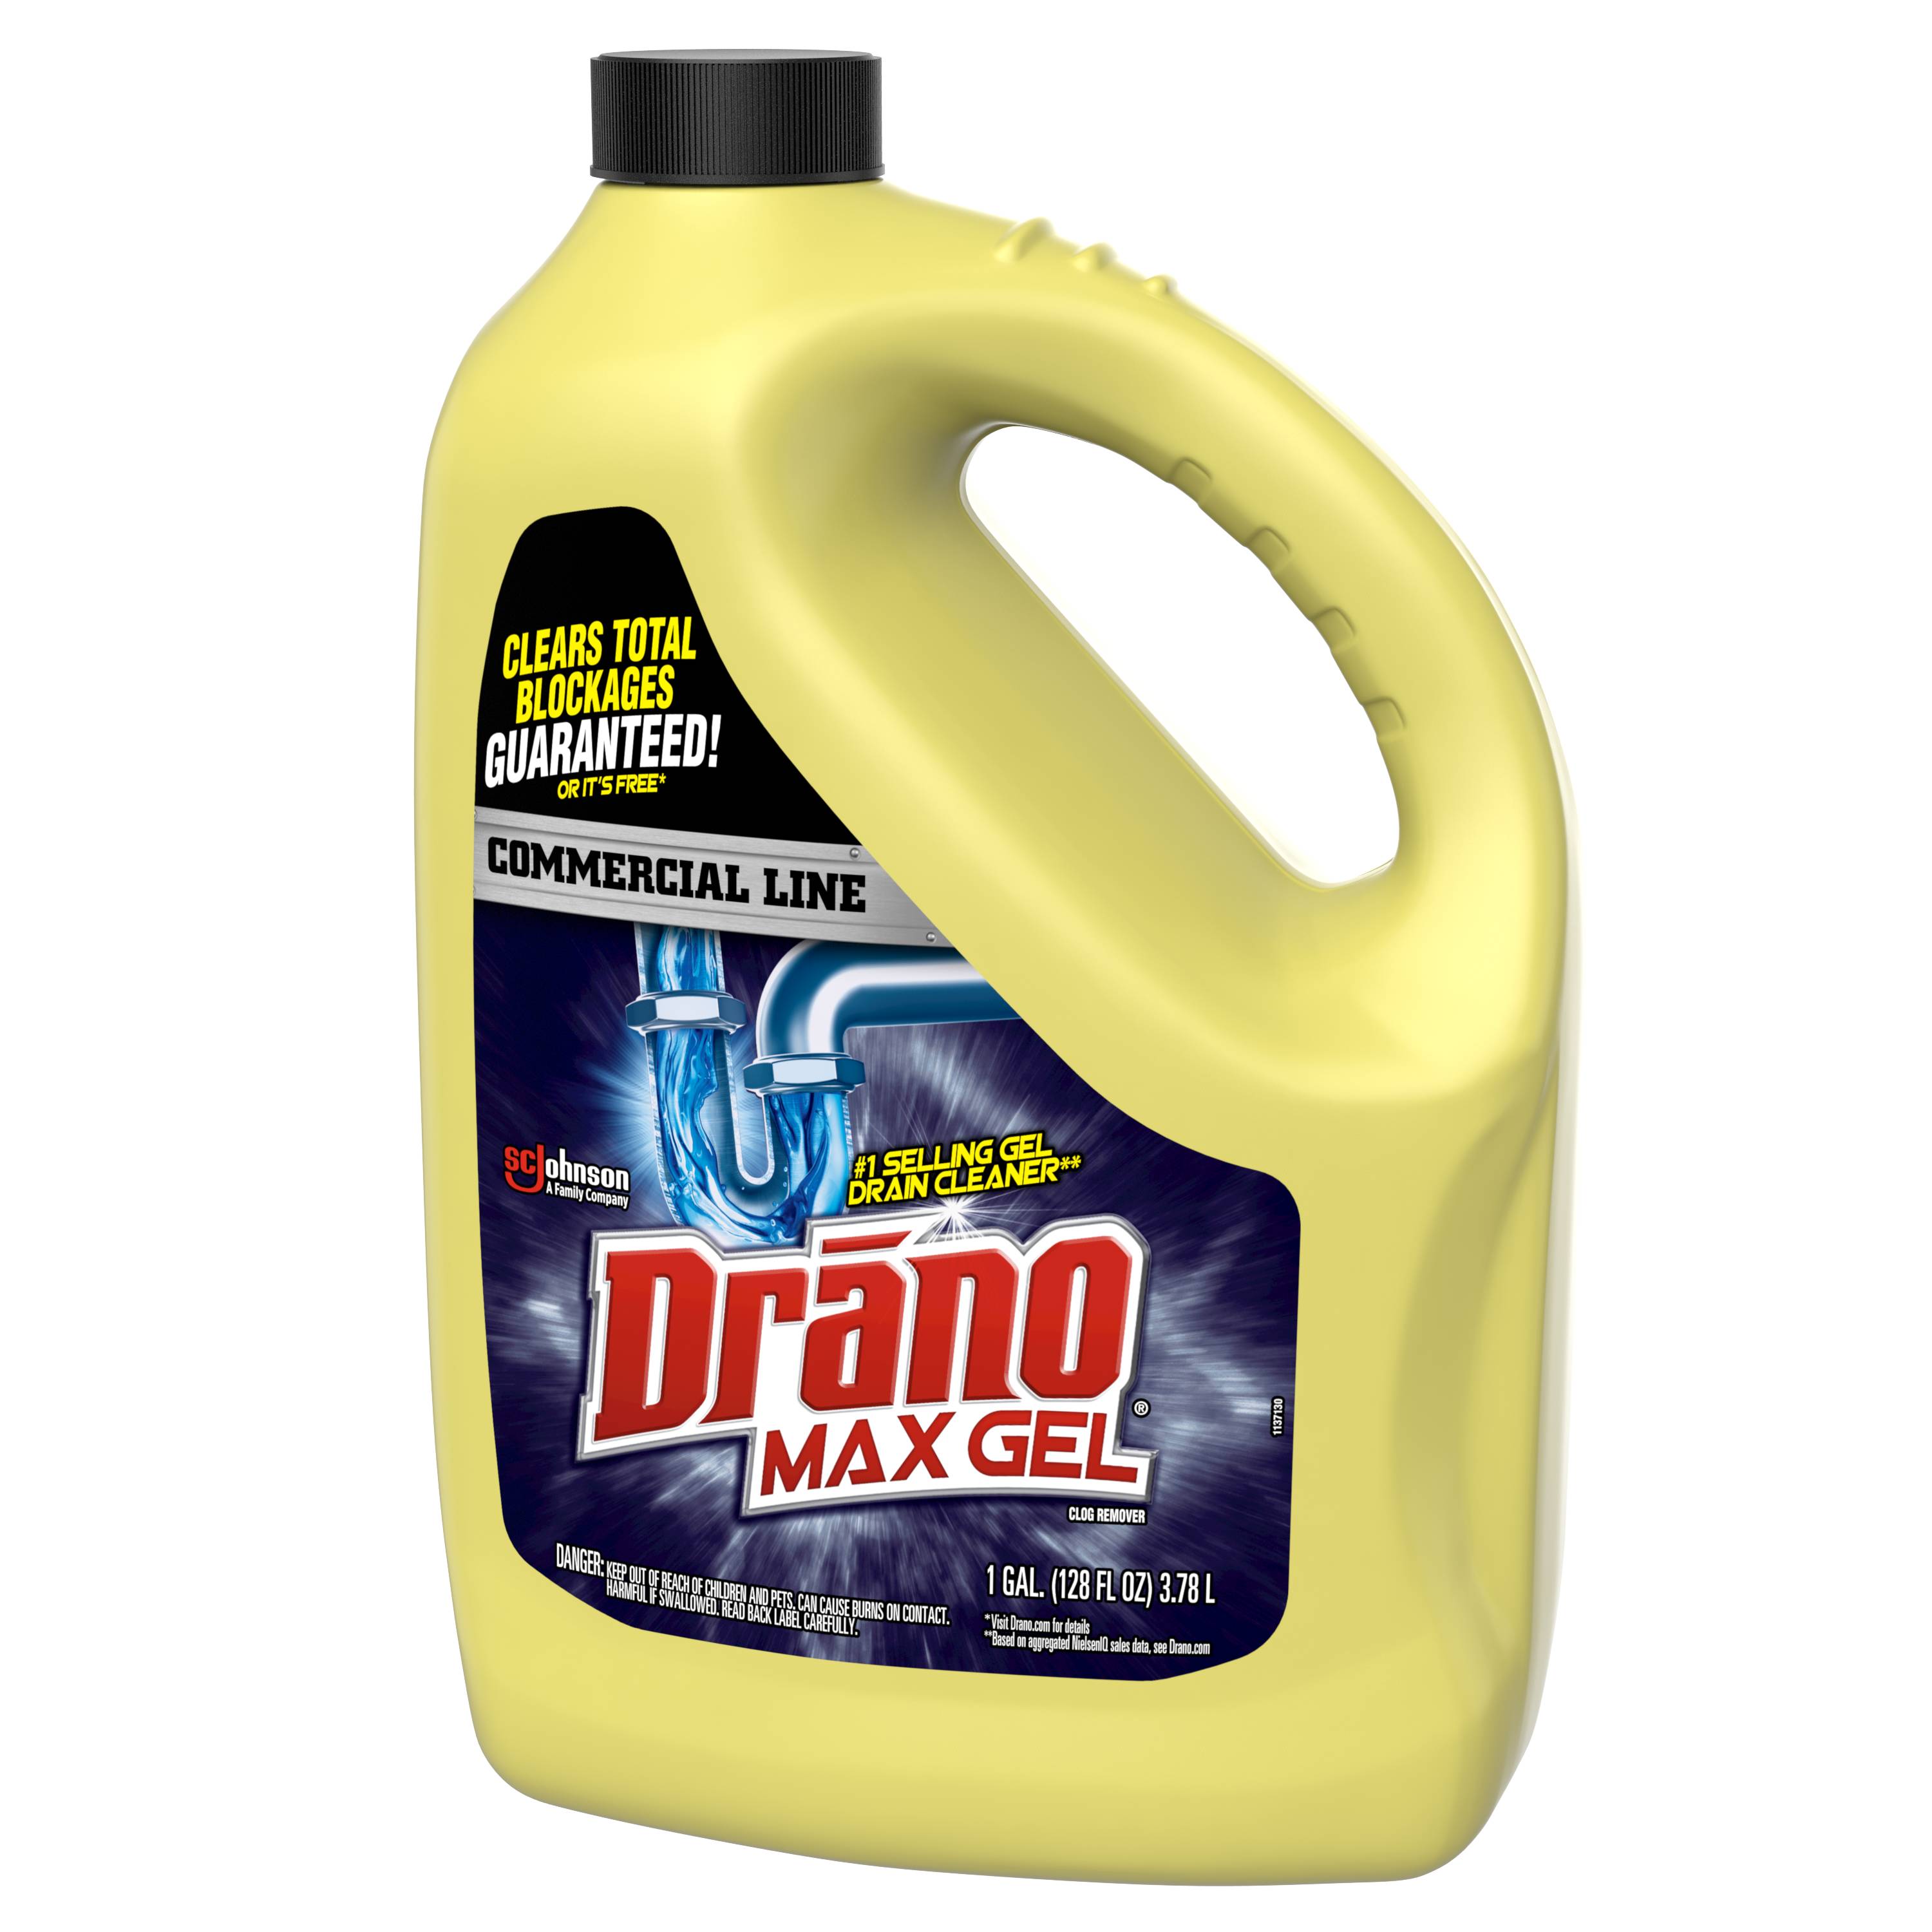 Can You Leave Drano Overnight? The Safe Use Guide